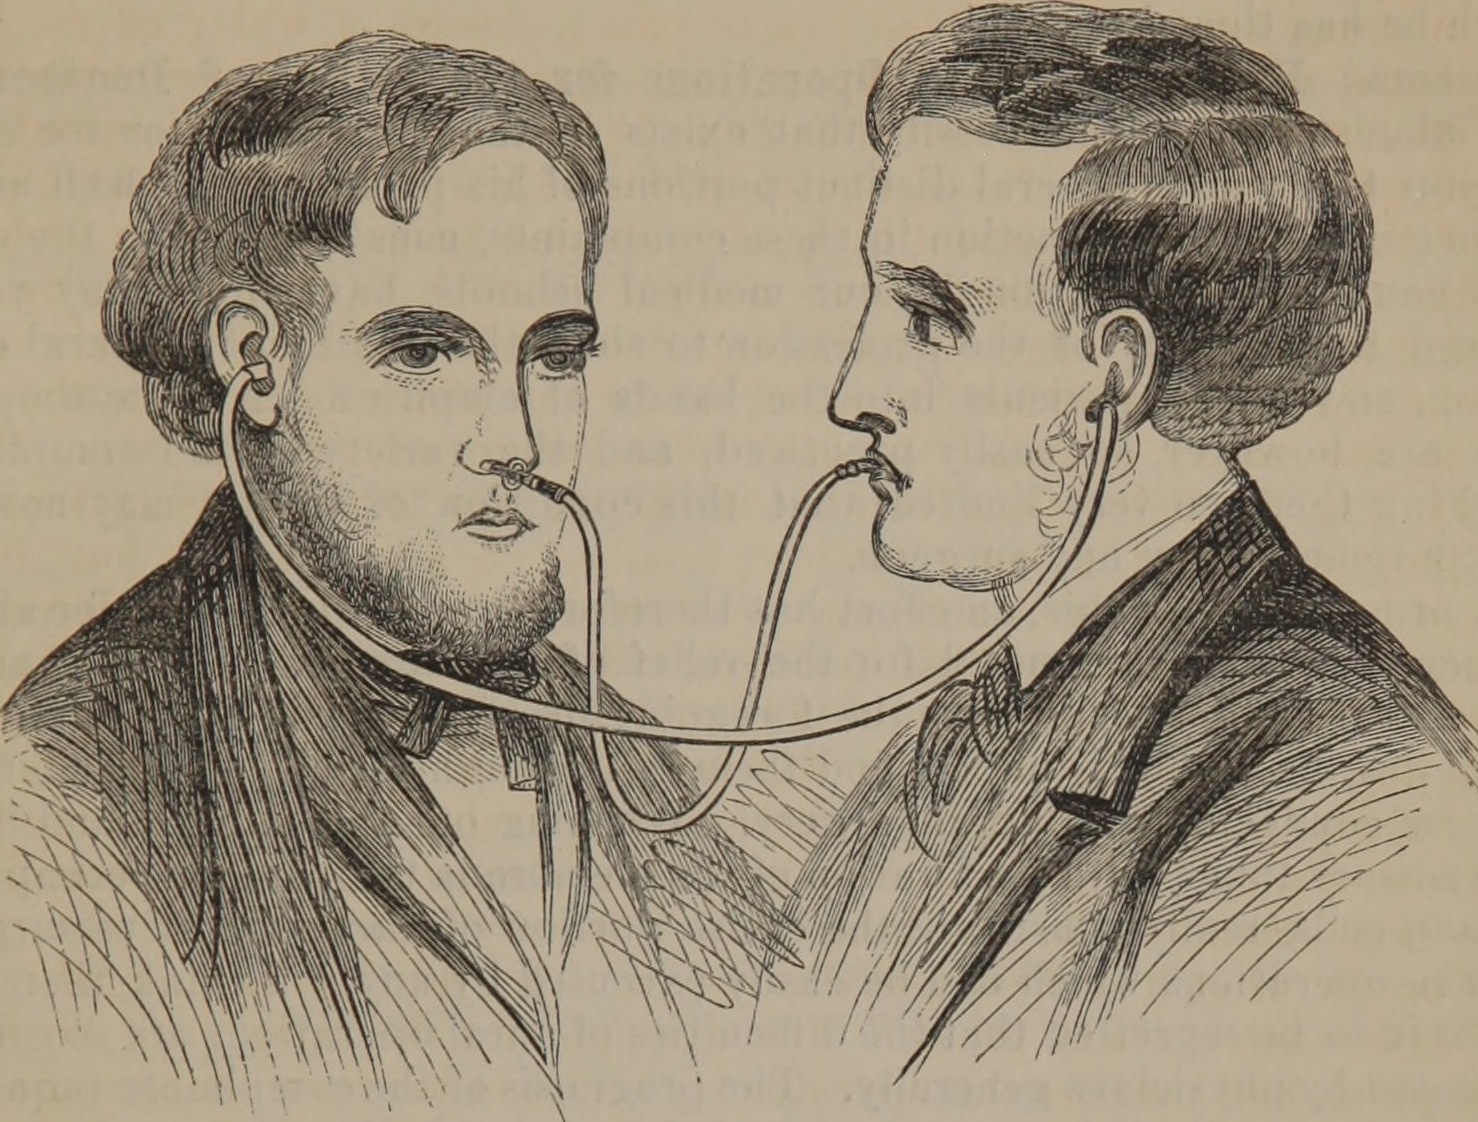 Archival medical image of 2 men with tubes.